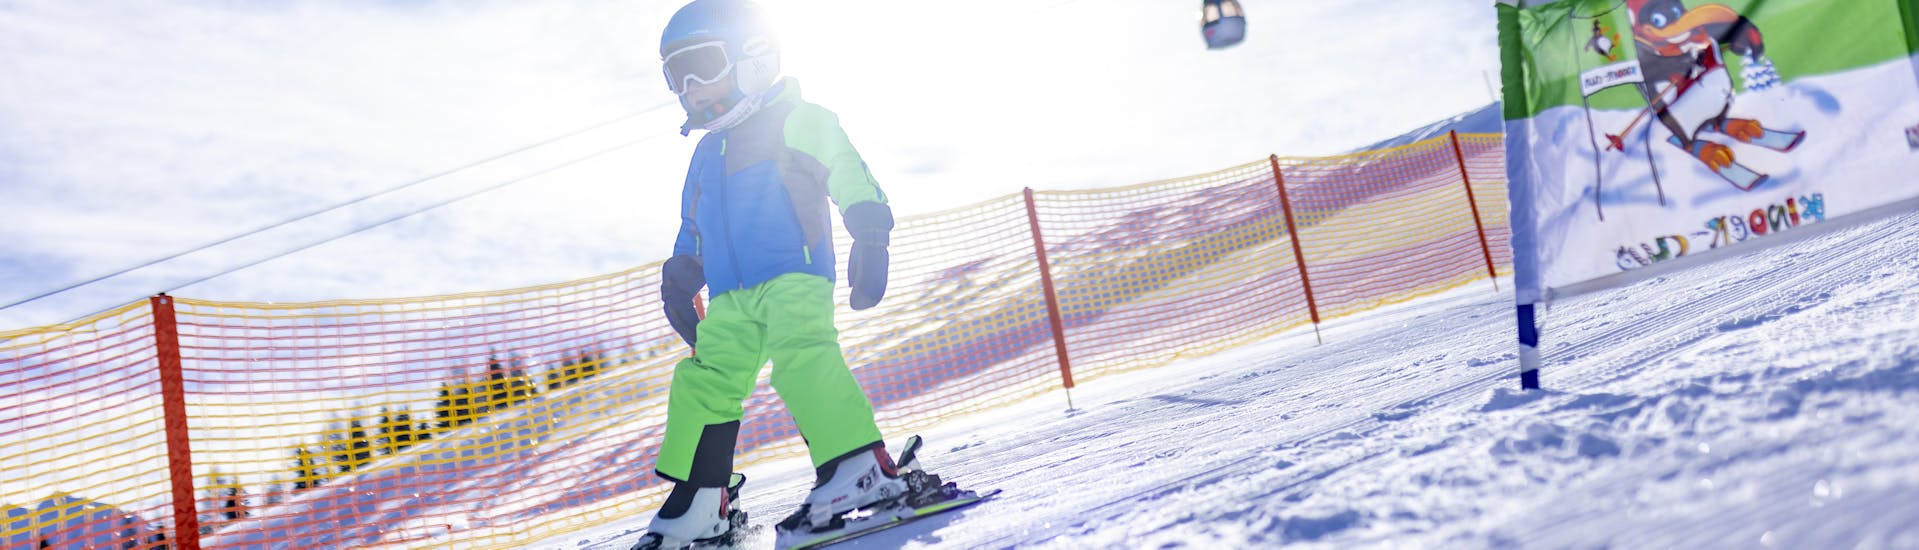 A little skier descends the slope in the Kinderland during a ski lesson for kids and teens for beginners with the Nassfeld Ski School.